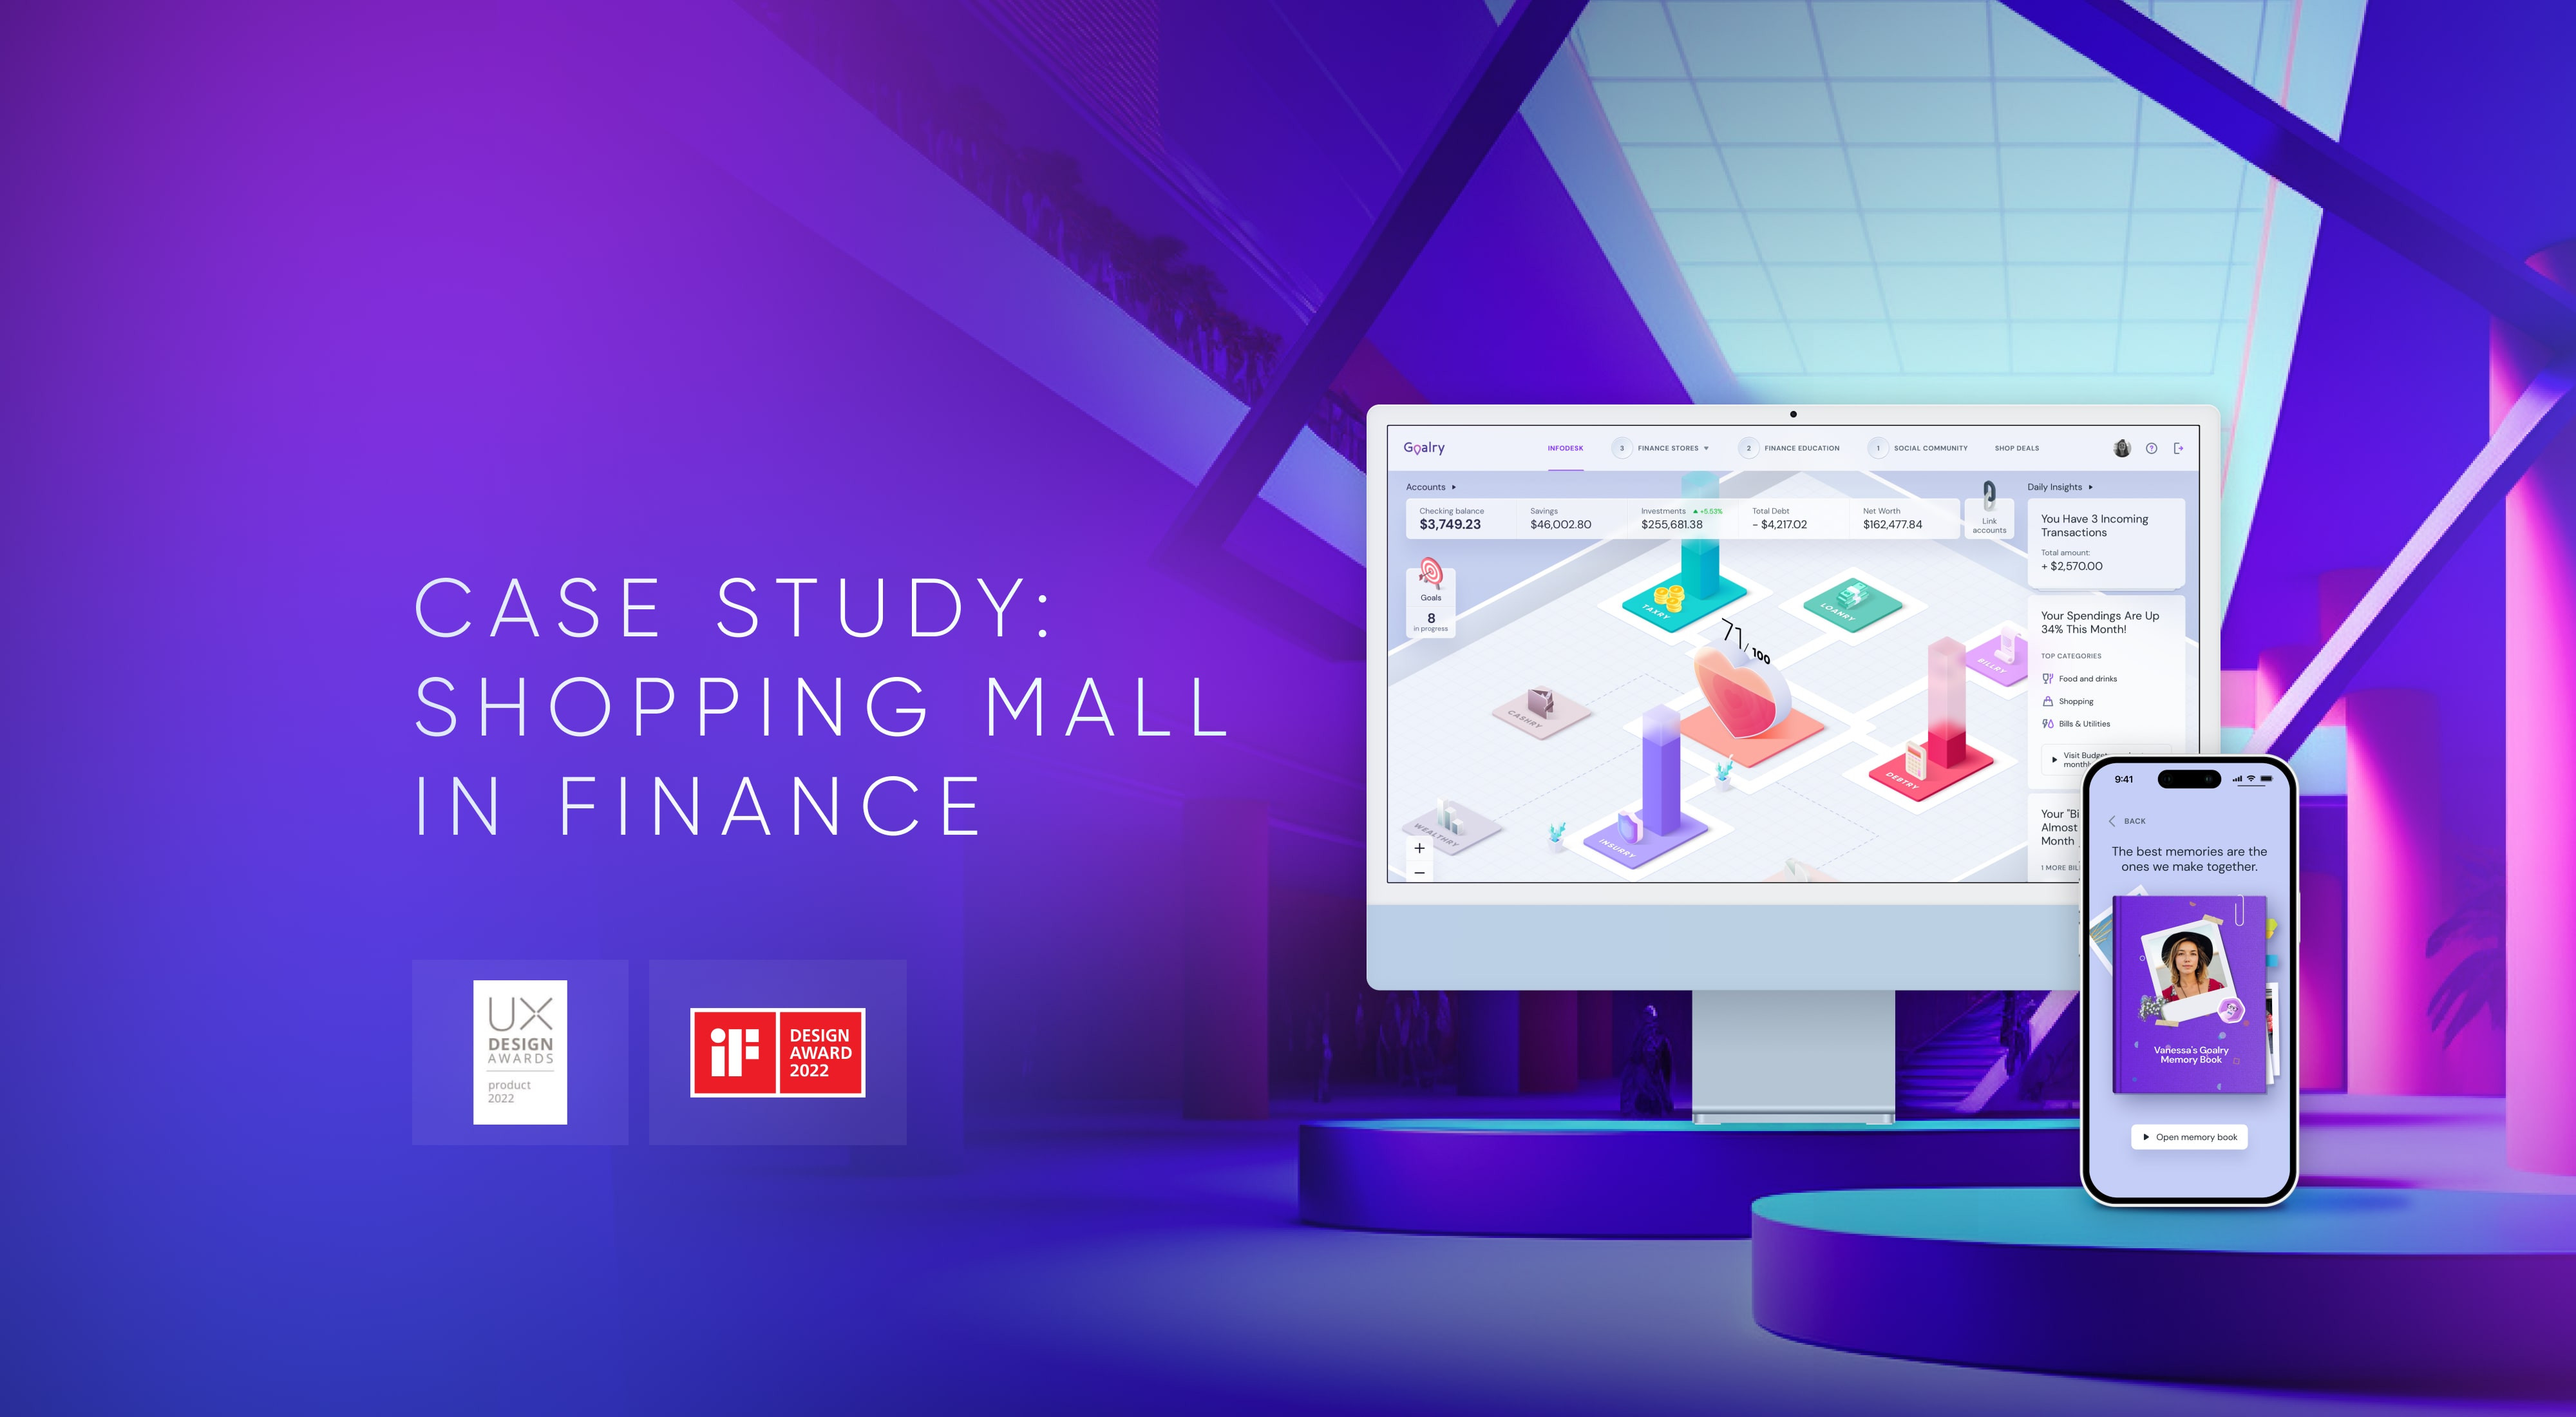 Goalry UX Case Study: Immersive Mall Experience Beyond Finance